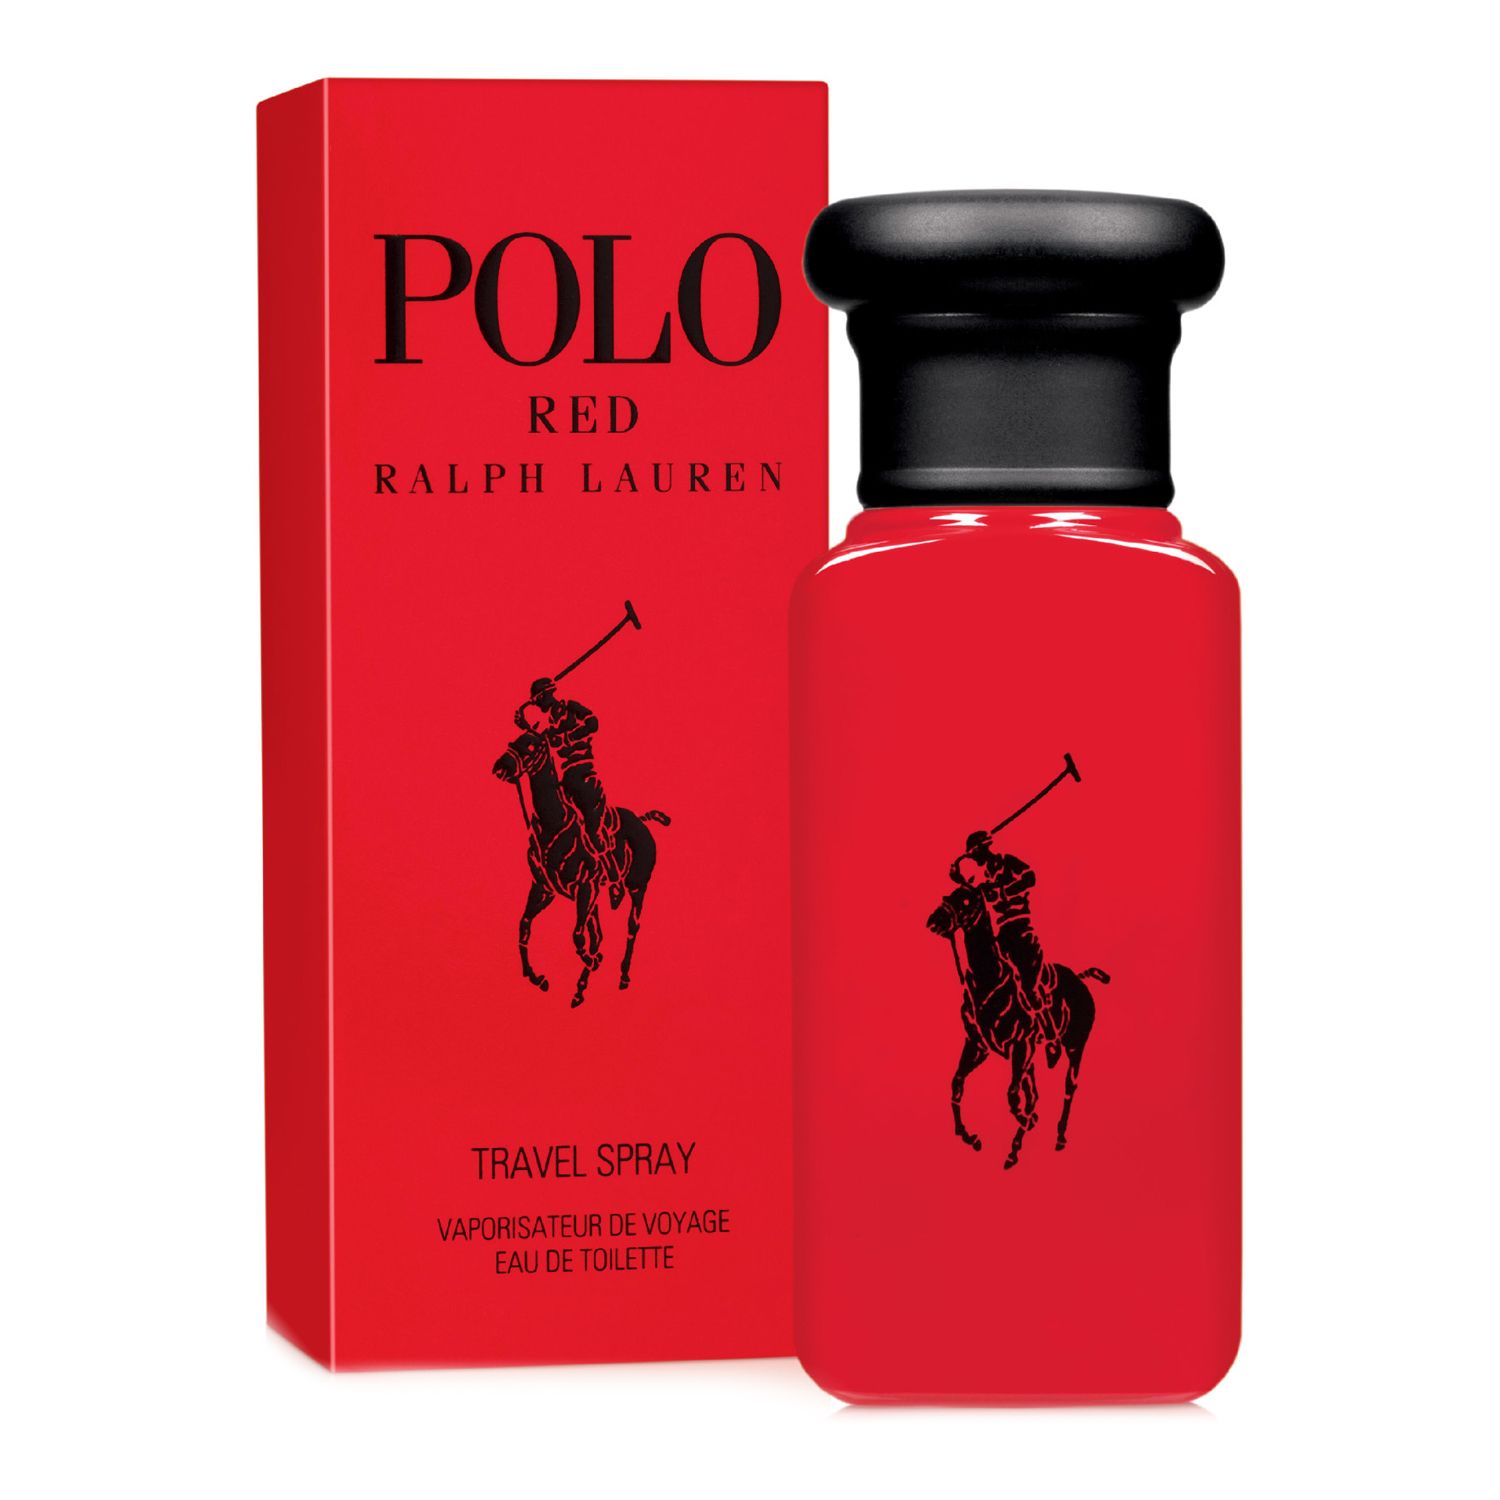 polo red cologne near me